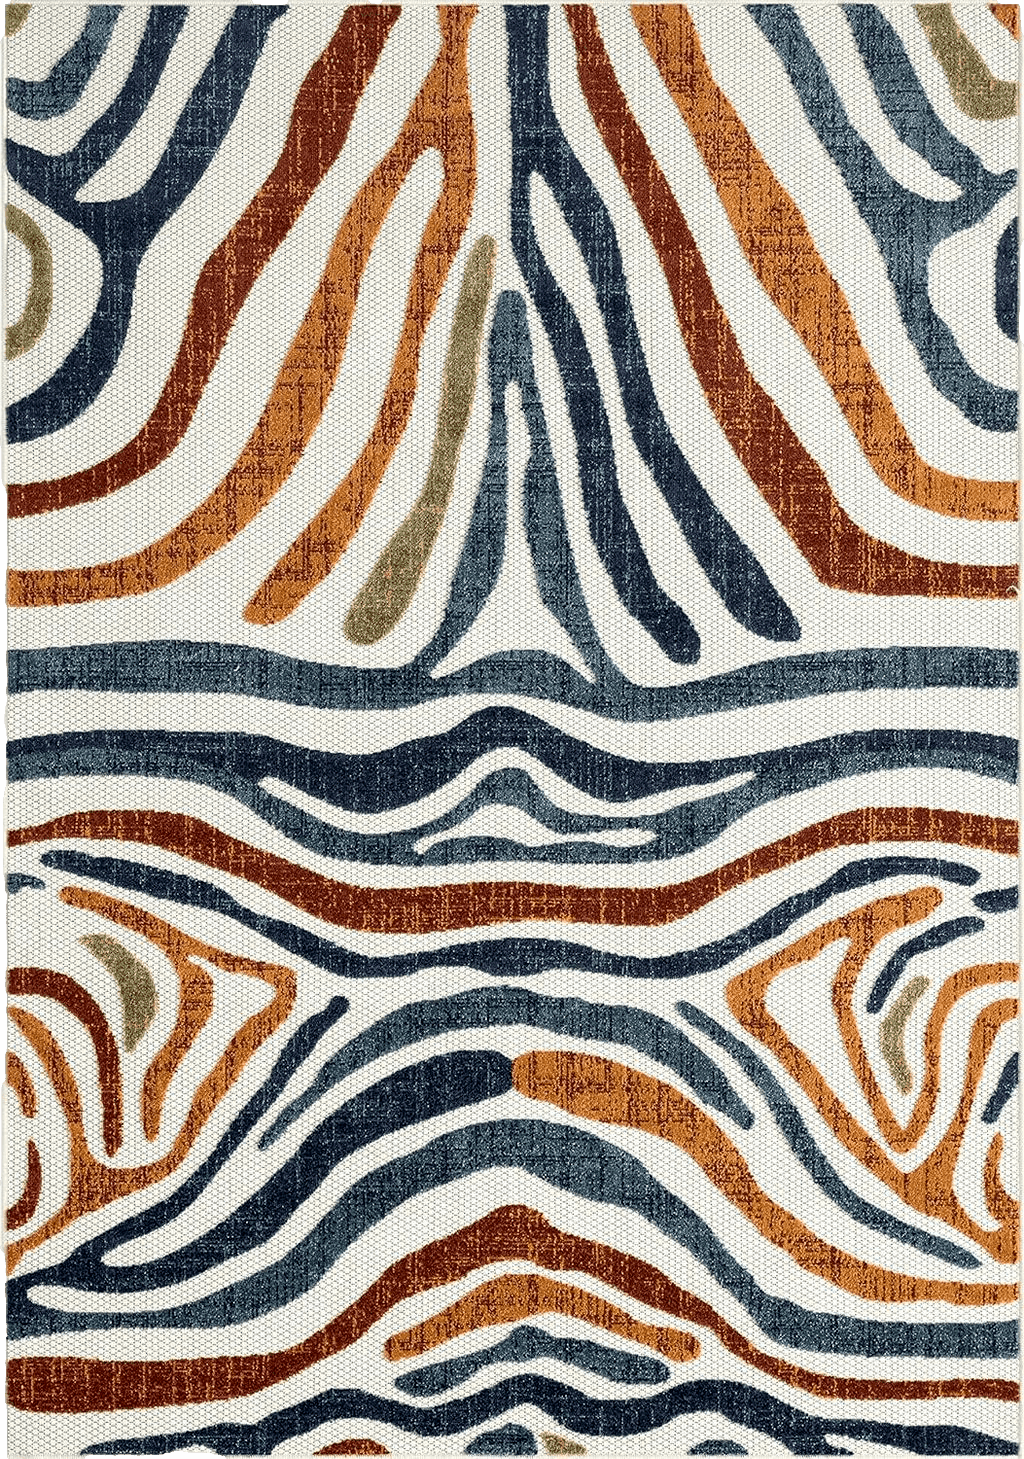 Abani Colorful Contemporary Zebra Print Area Rug Rugs - Multicolor Non-Shed 5'3" x 7'6" (5x8) Animal Pattern Blue & Brown Indoor/Outdoor Rug